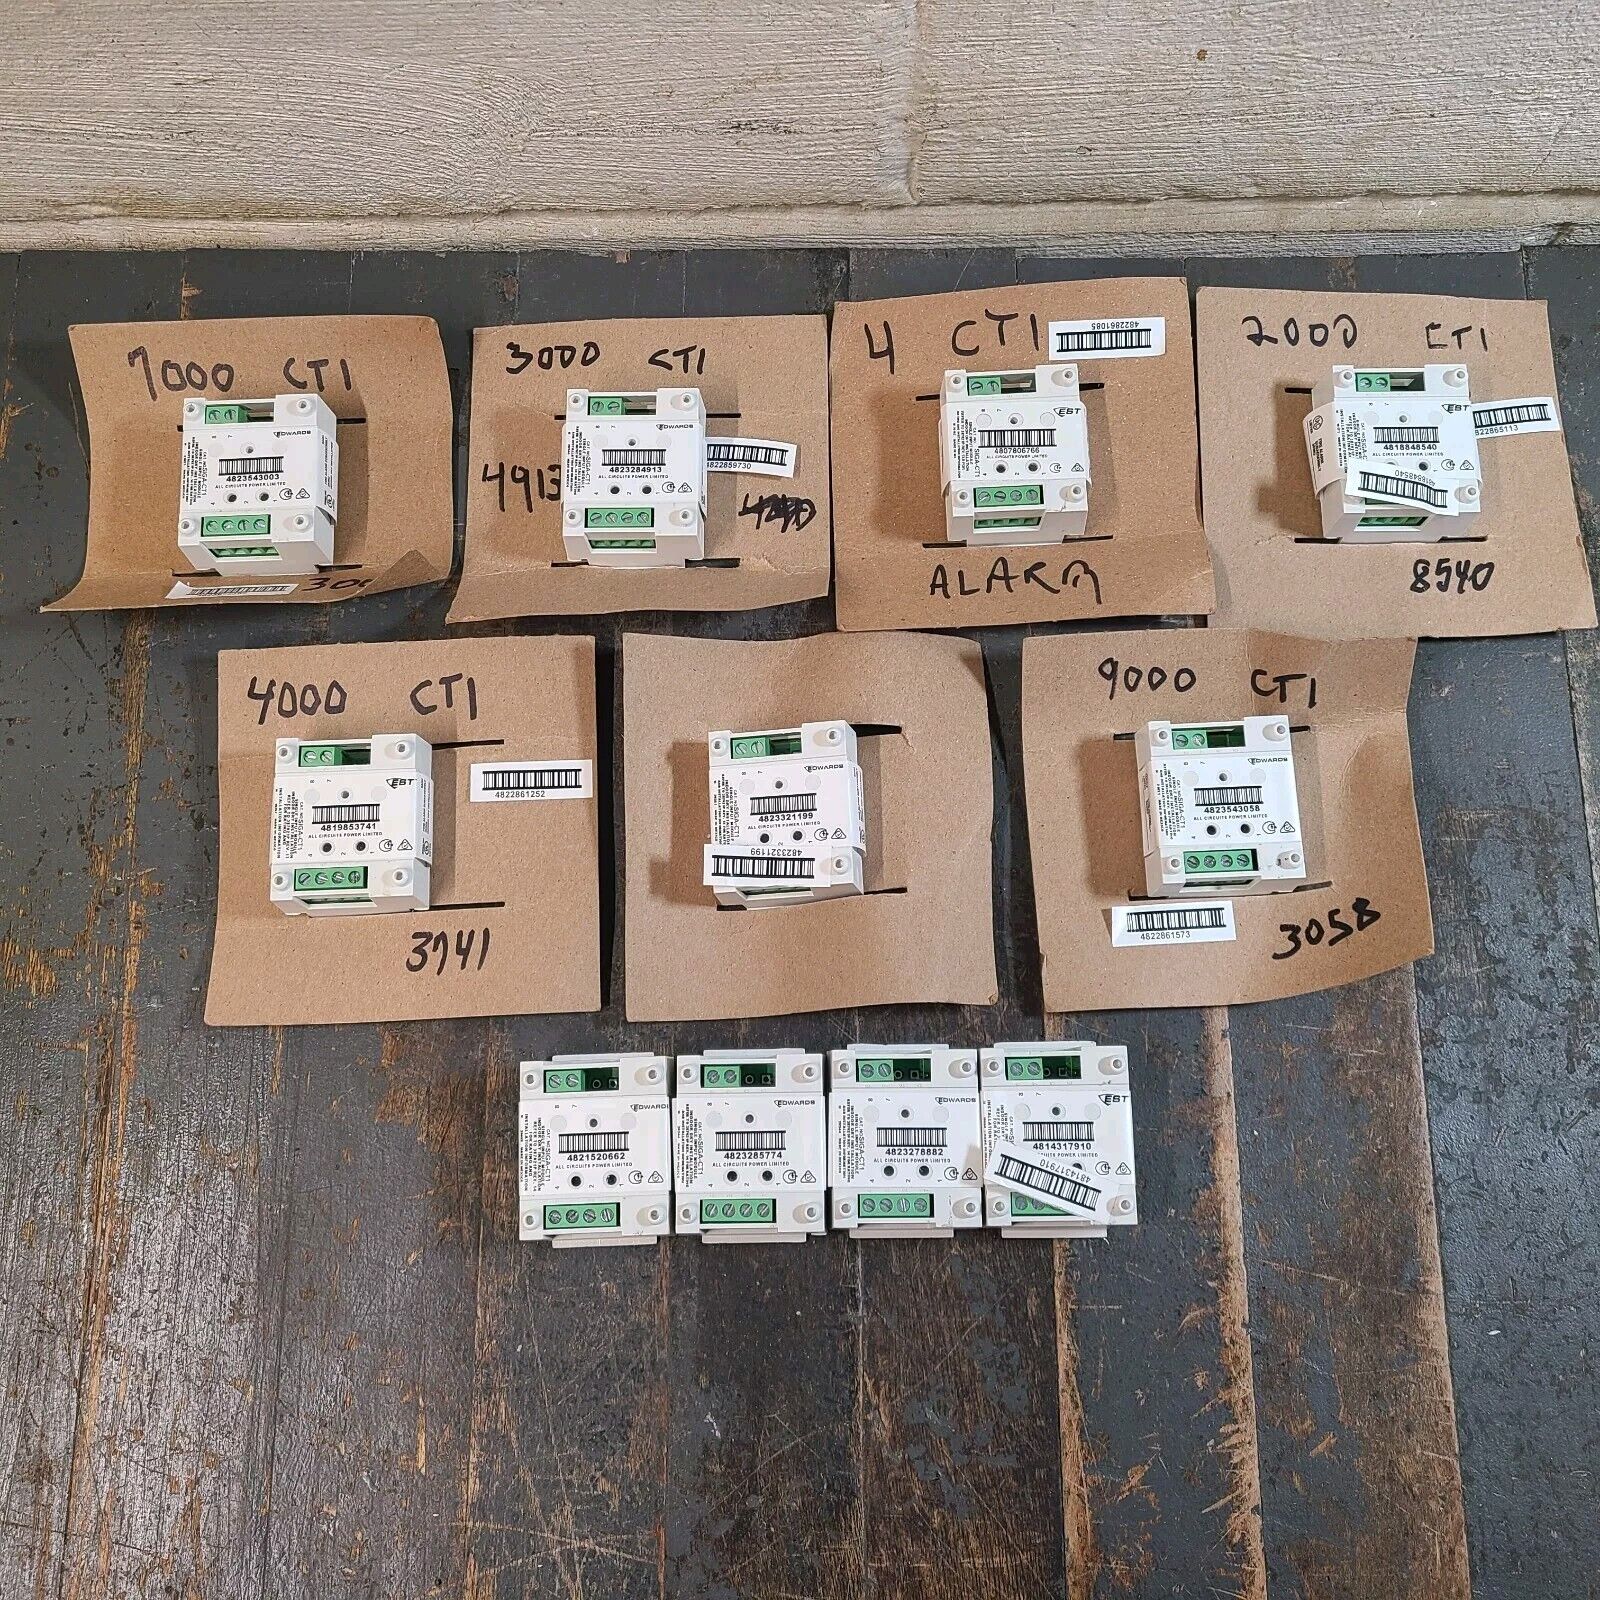 EDWARDS EST SIGA-CT1 MONITOR MODULES - LOT OF 11 *MISSING COVERS, HRDWRE, PAPER*